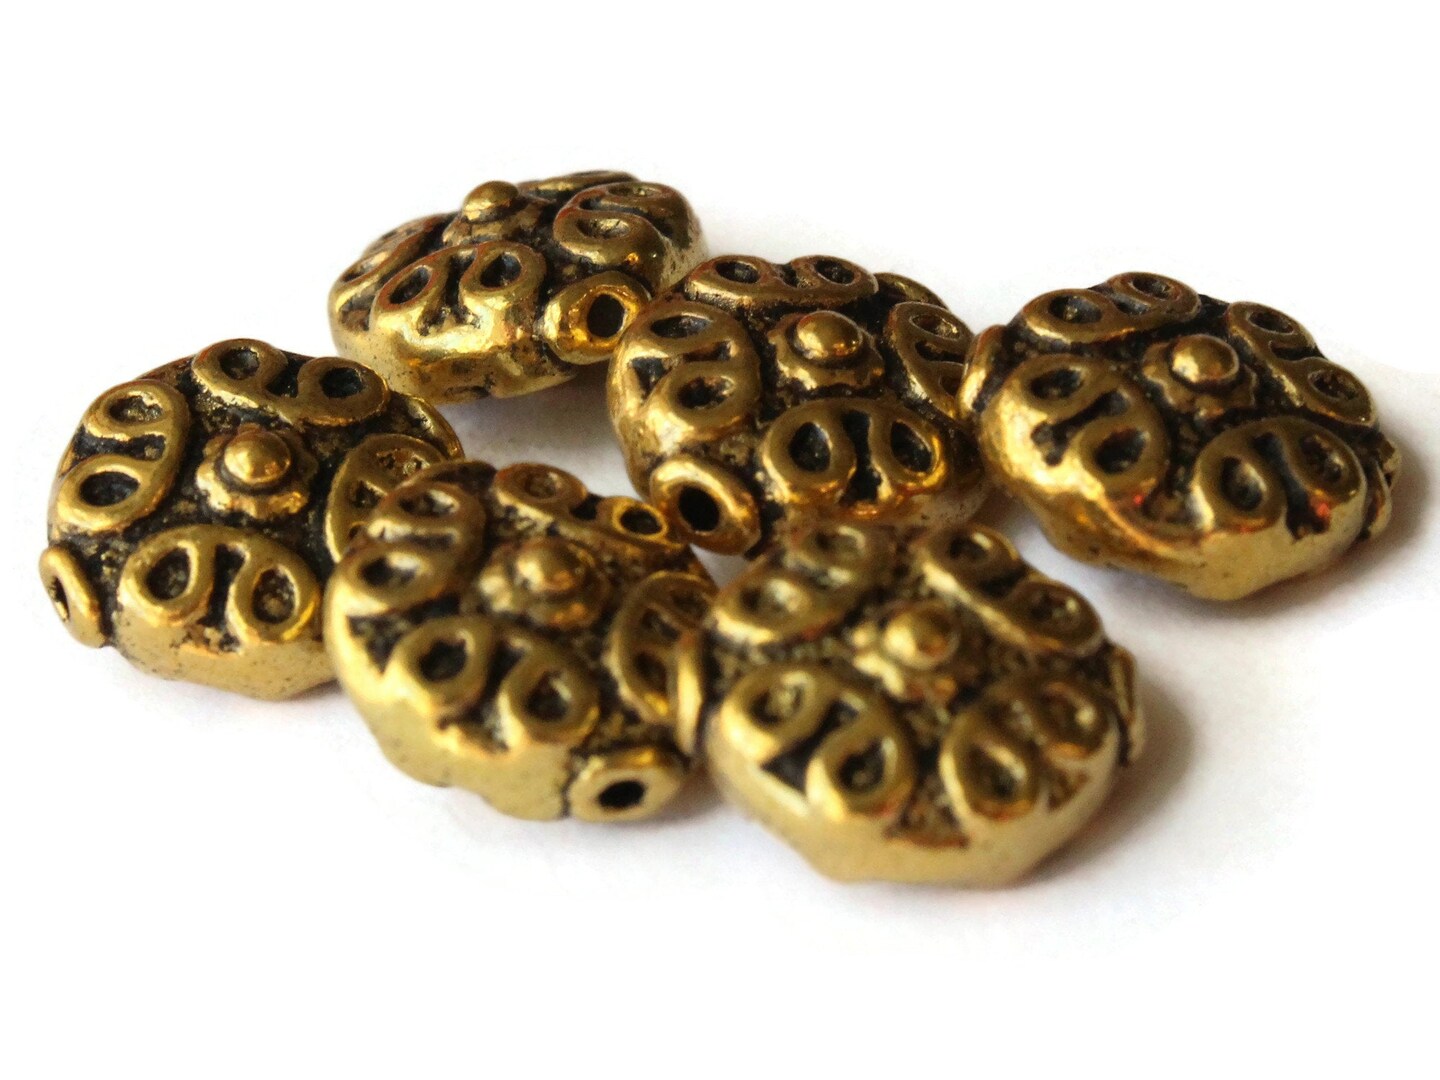 6 12mm Antique Golden Patterned Coin Beads with Rim